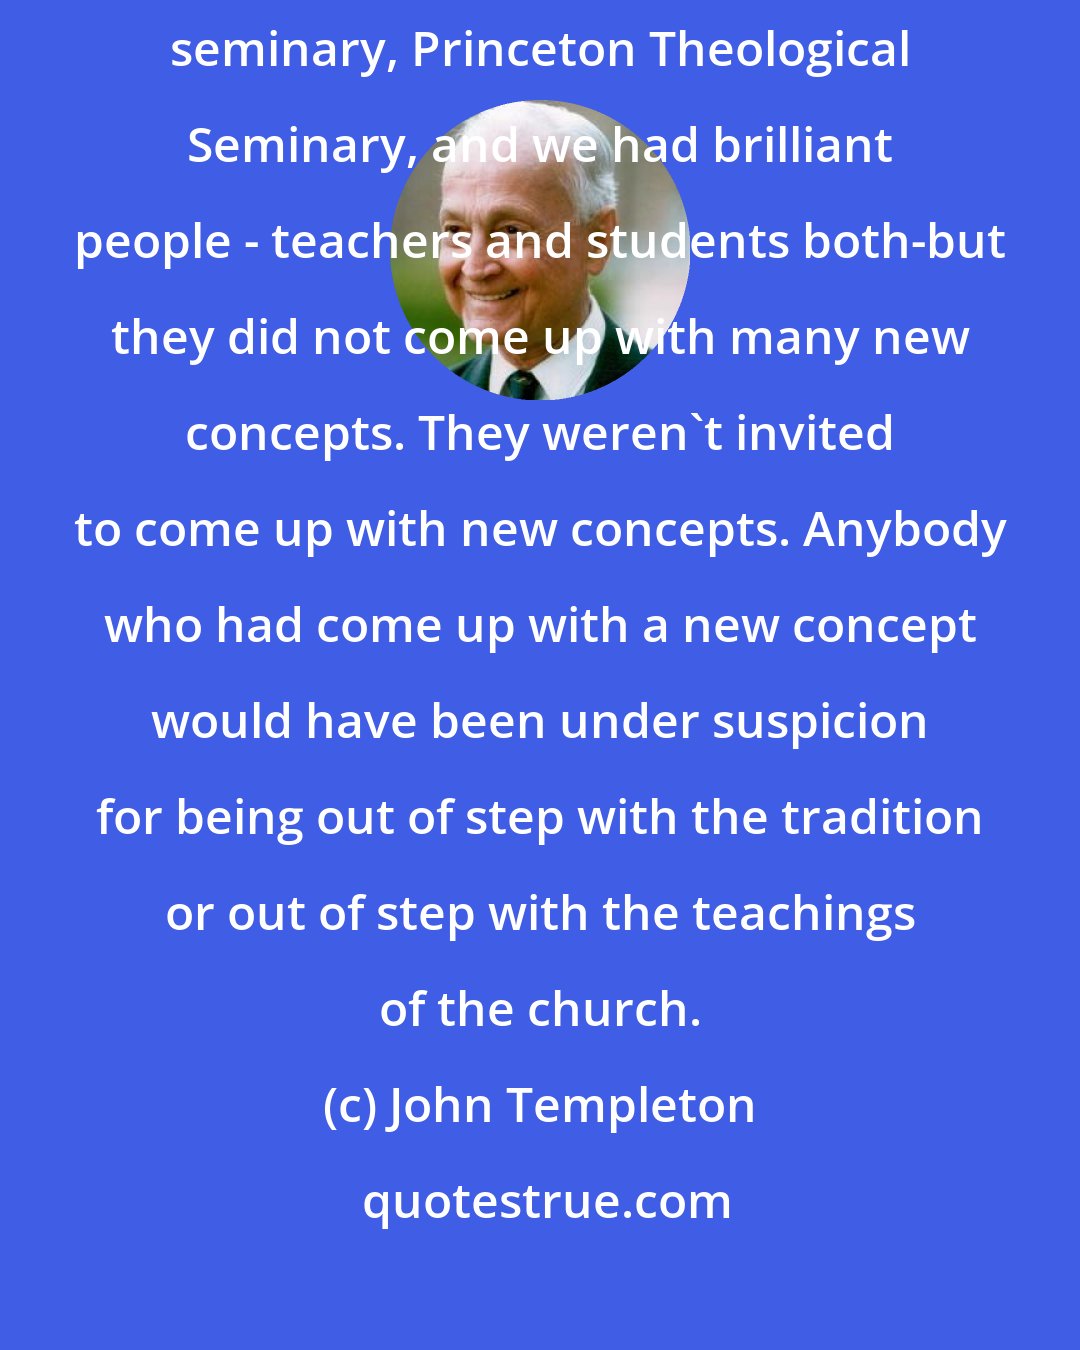 John Templeton: I served for 42 years on the board of trustees of the largest Presbyterian seminary, Princeton Theological Seminary, and we had brilliant people - teachers and students both-but they did not come up with many new concepts. They weren't invited to come up with new concepts. Anybody who had come up with a new concept would have been under suspicion for being out of step with the tradition or out of step with the teachings of the church.